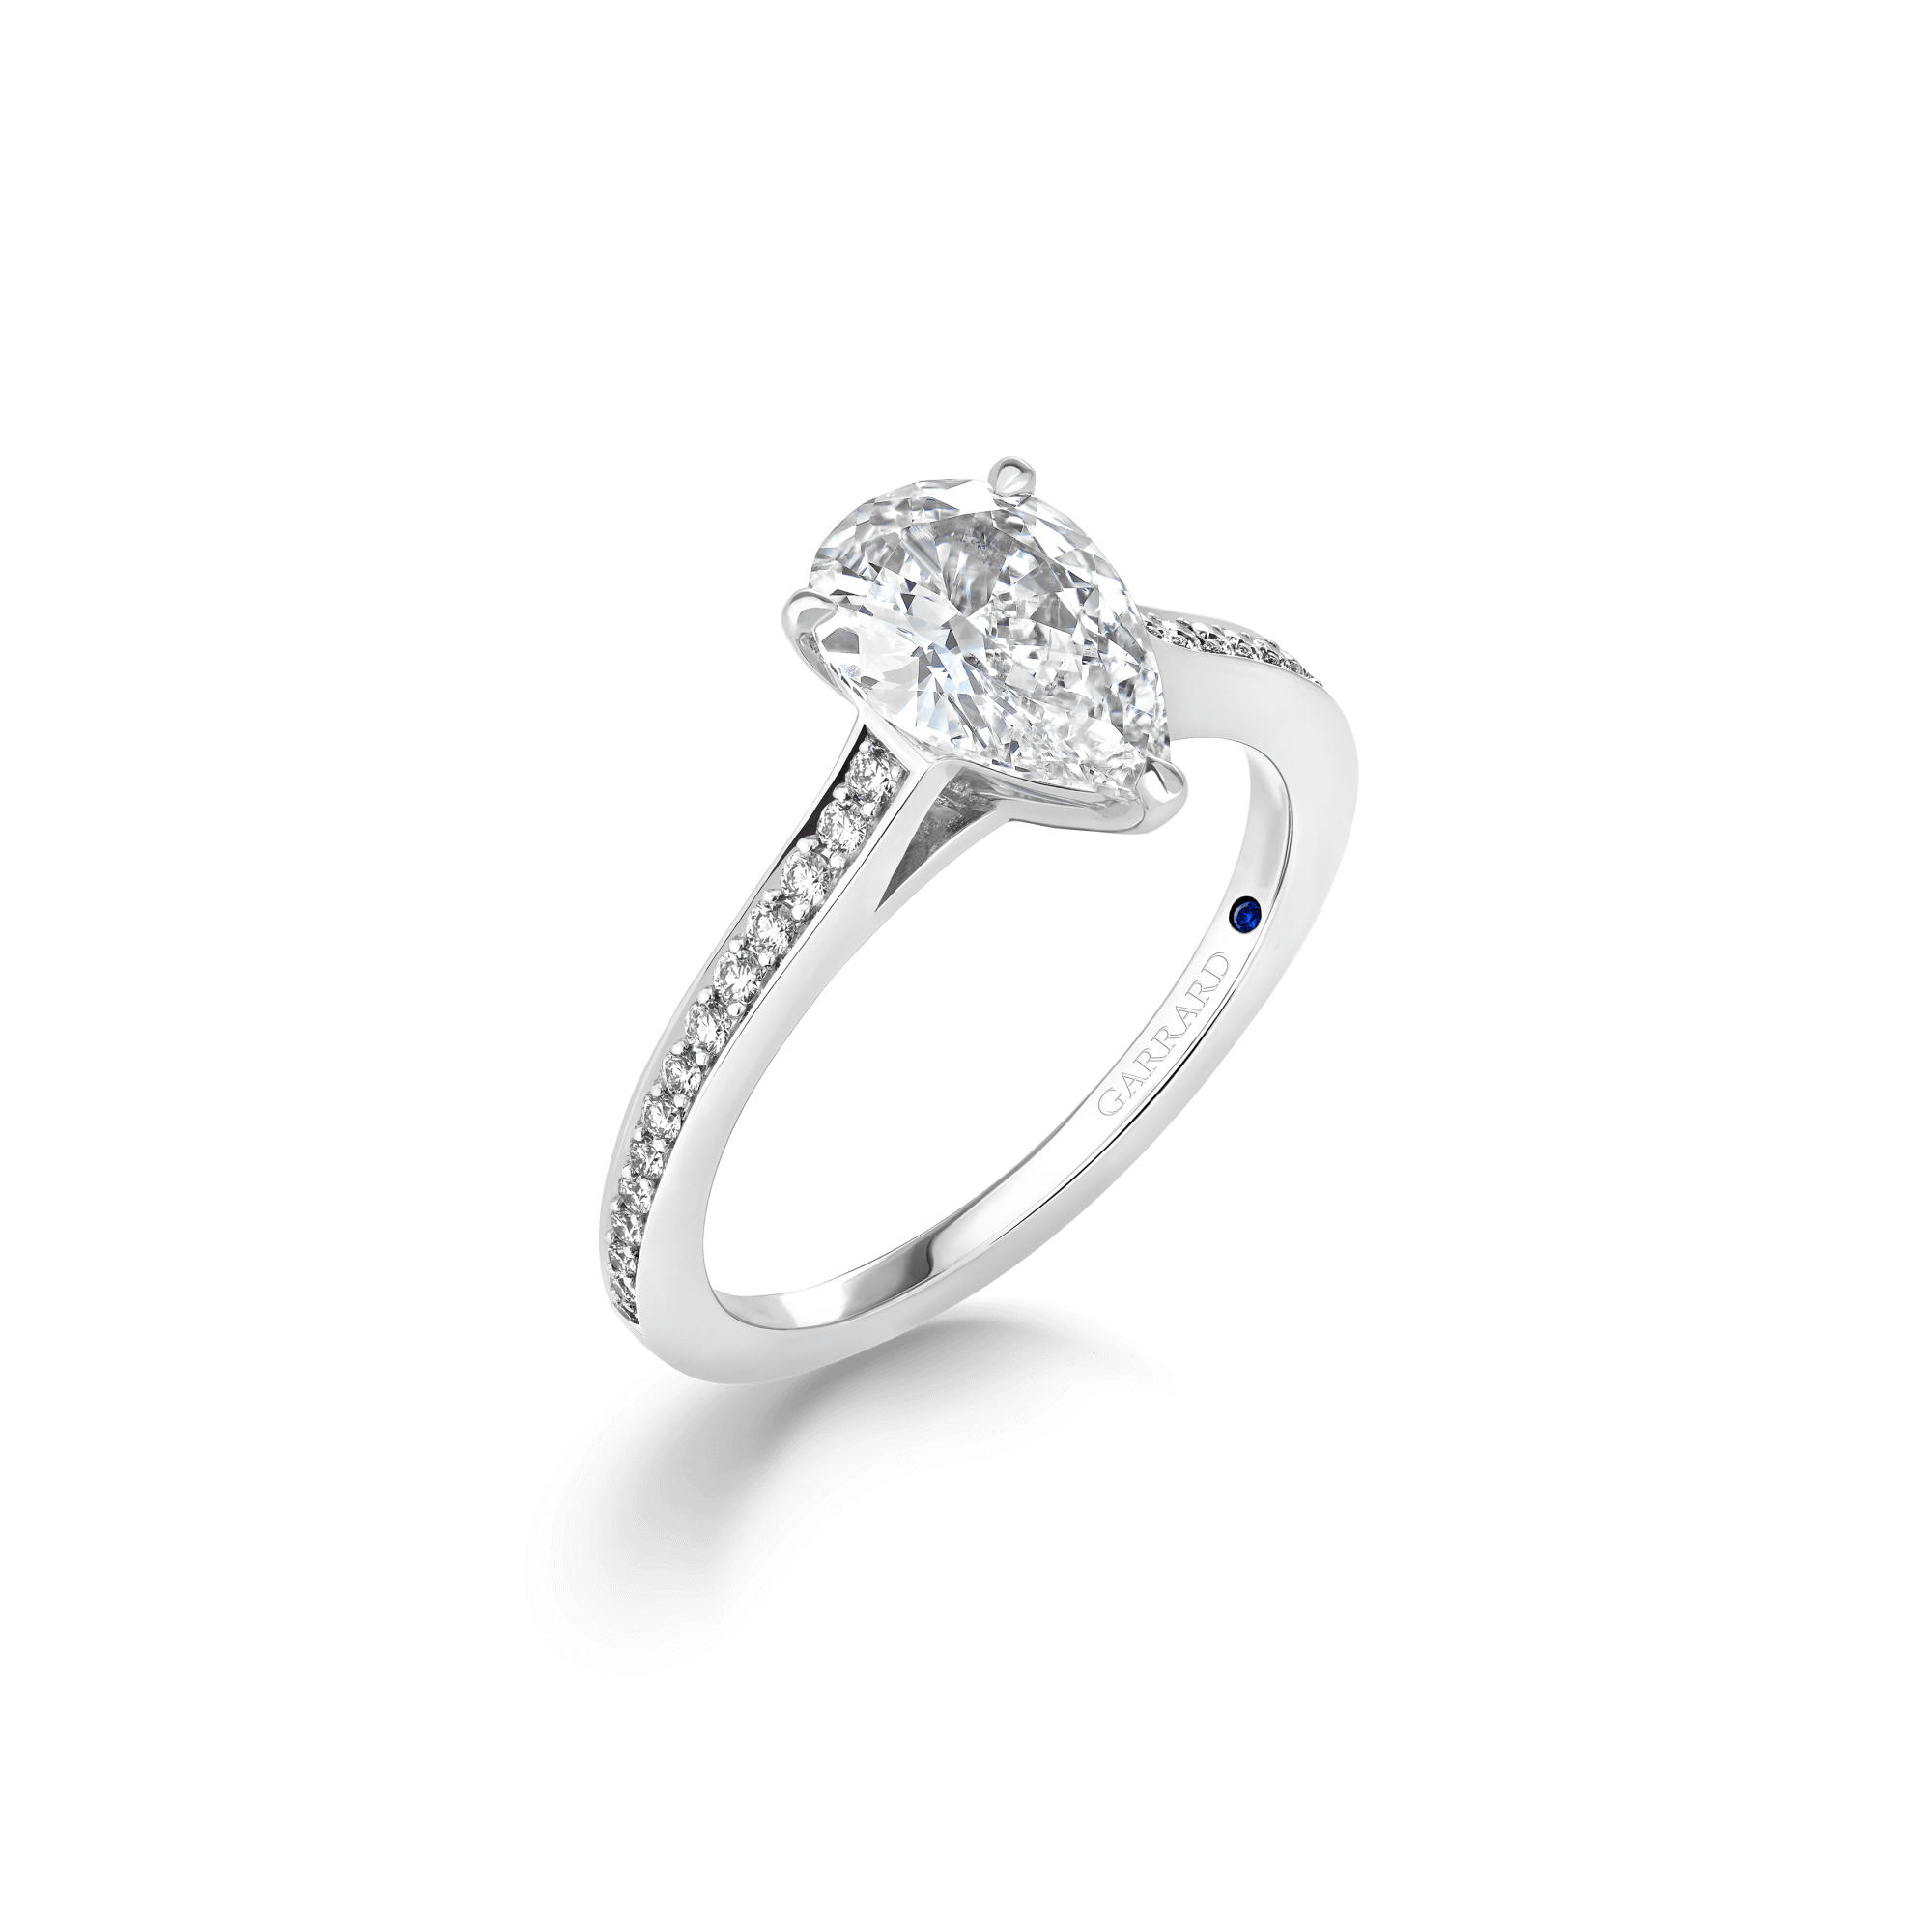 Garrard Cherish 1.31ct Pear Shape Diamond Solitaire Engagement Ring In 18ct White Gold with Diamonds 2017171